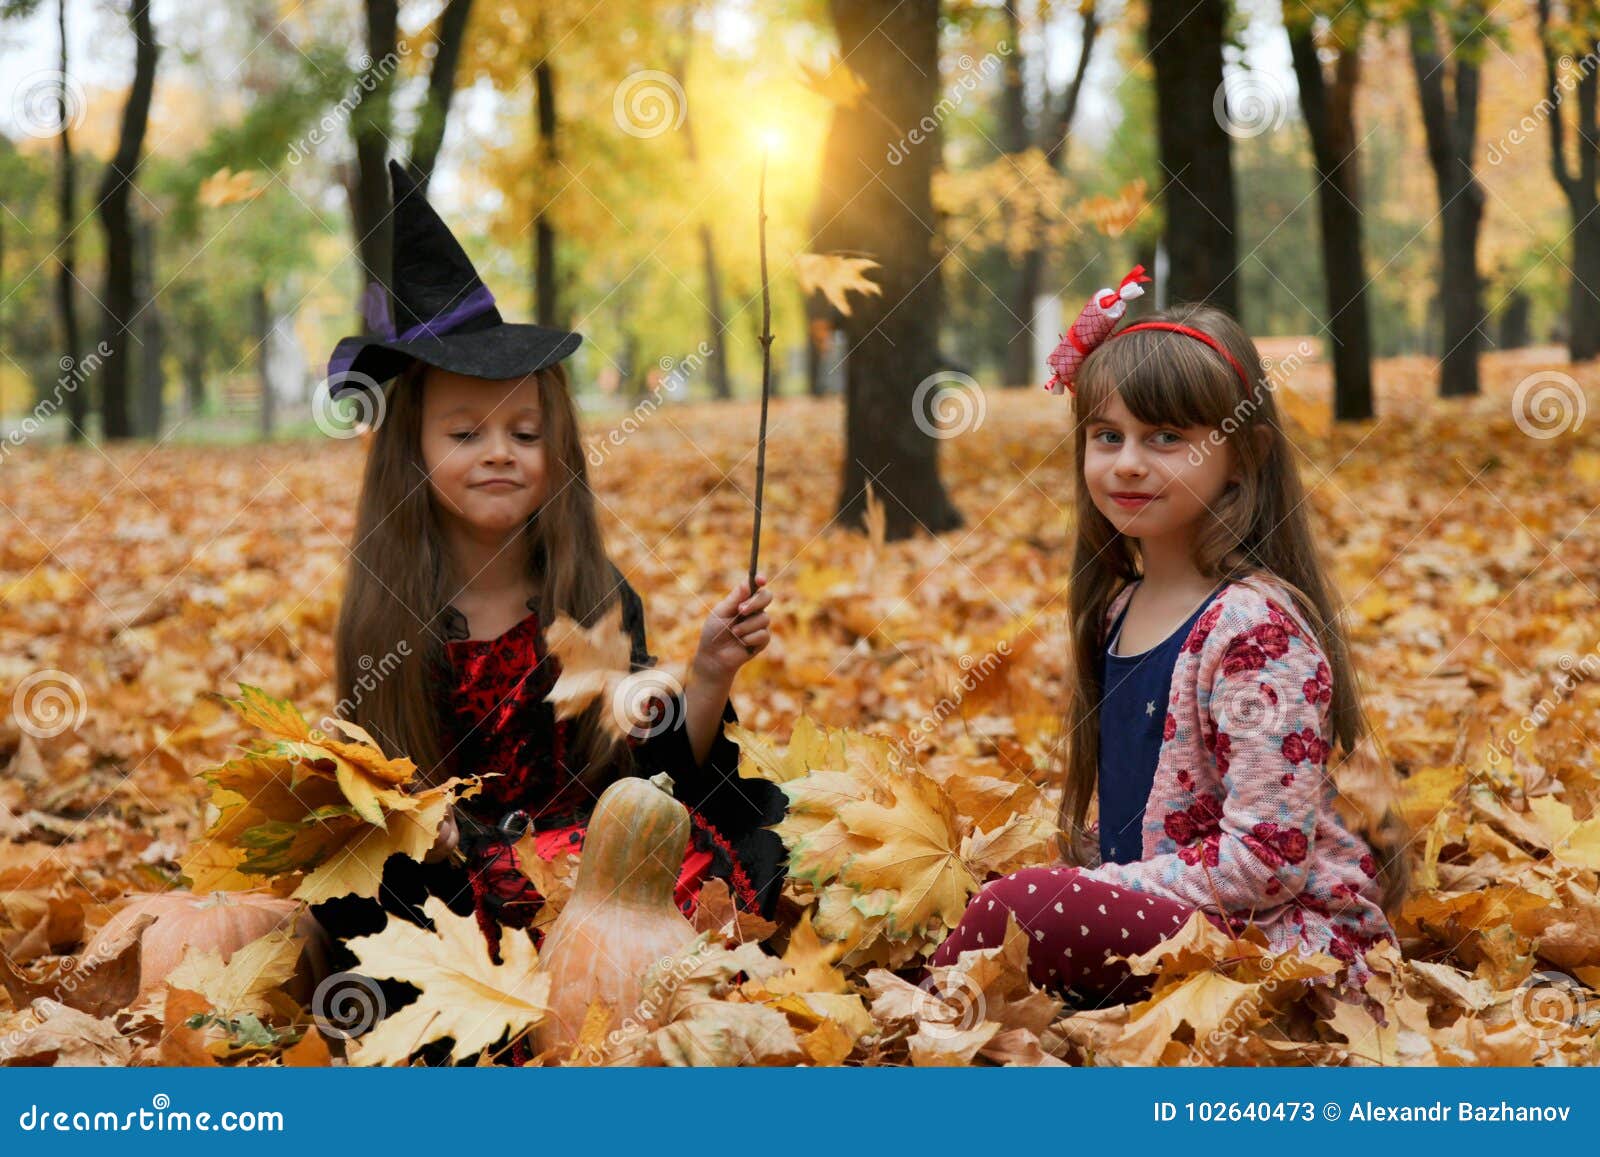 Two Girls in Halloween Costumes Stock Image - Image of conjure, colors ...